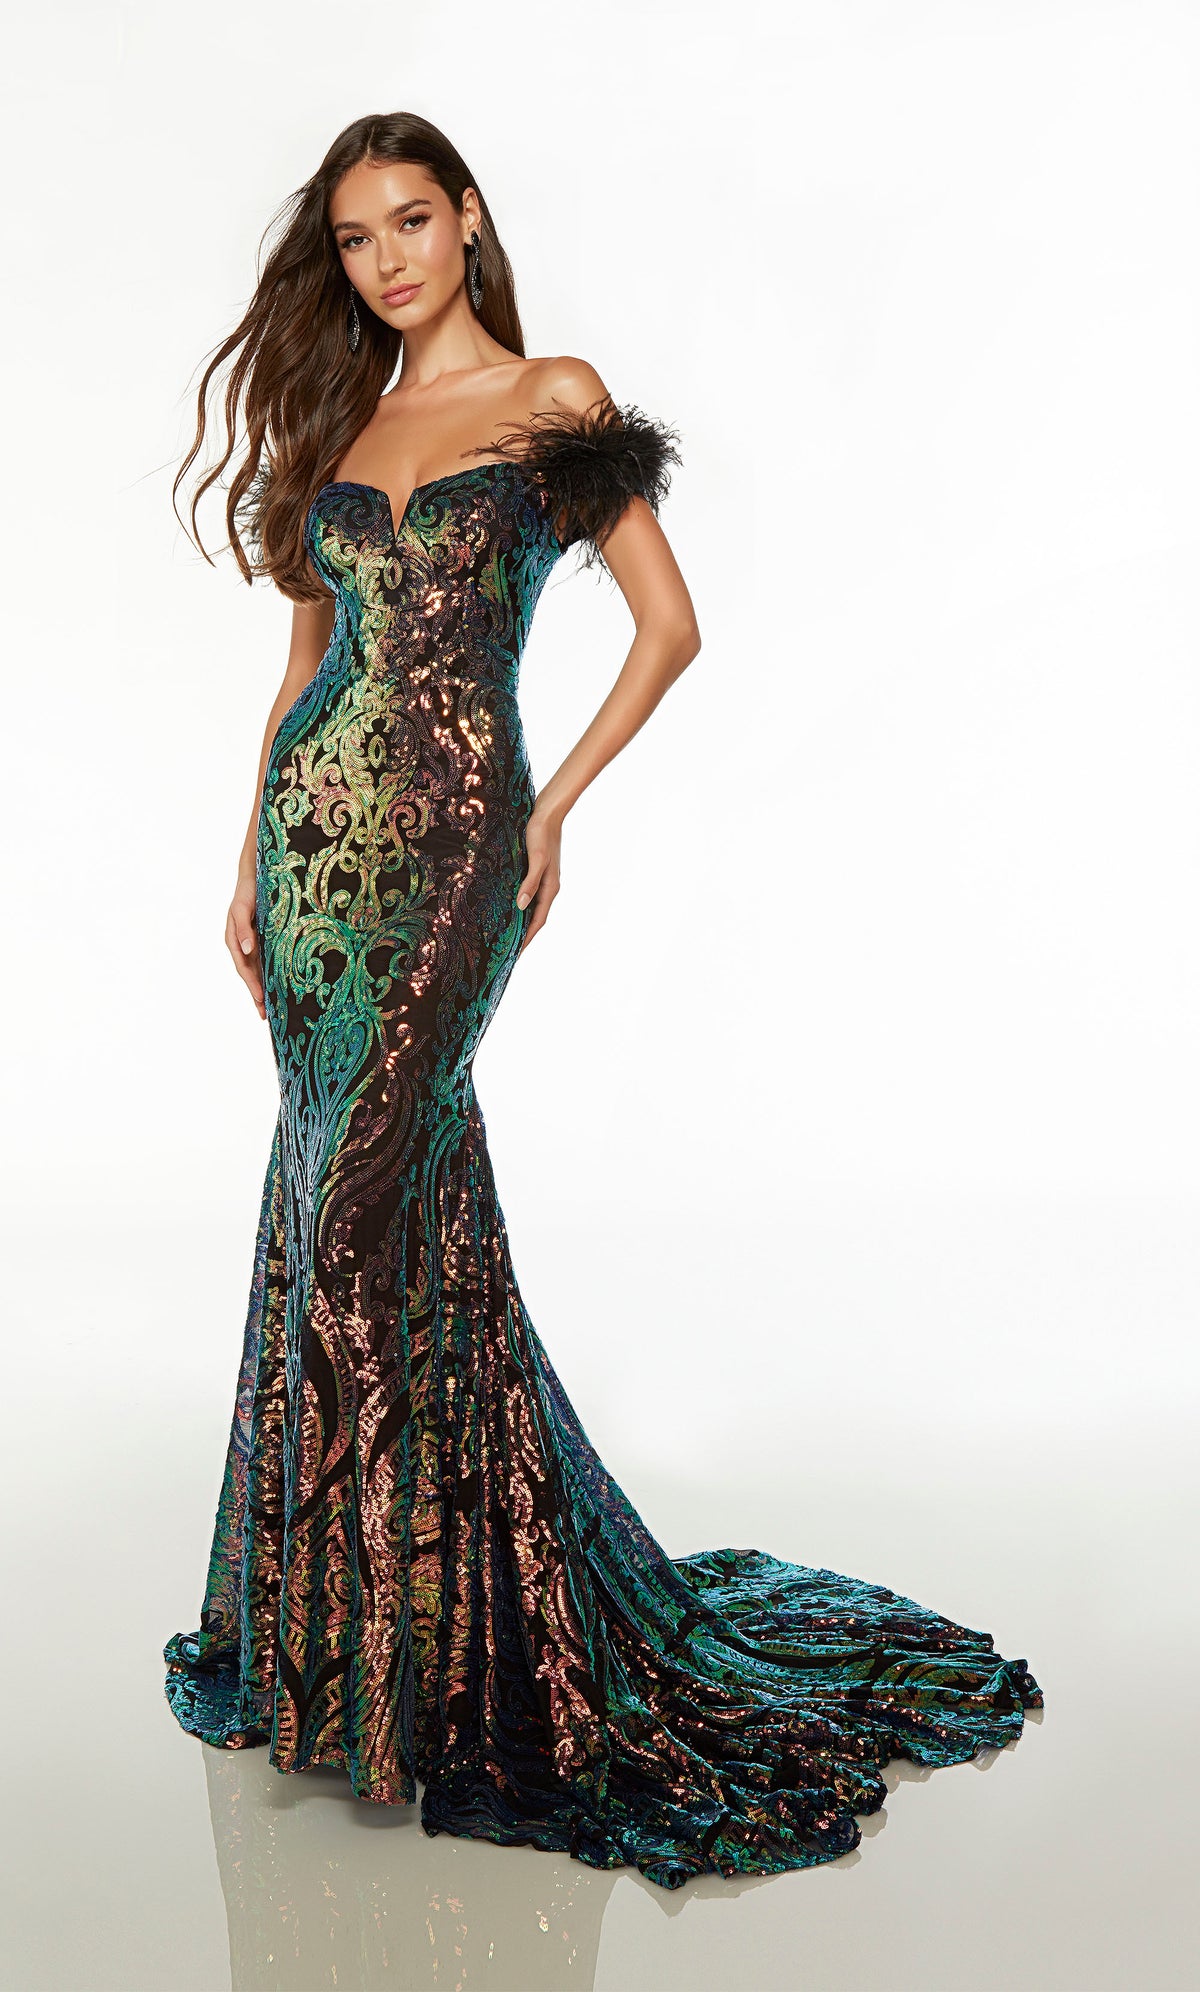 Elegant black mermaid gown: off-shoulder, feather sleeves, fitted bodice, lace-up back, long train, paisley-patterned iridescent sequins.